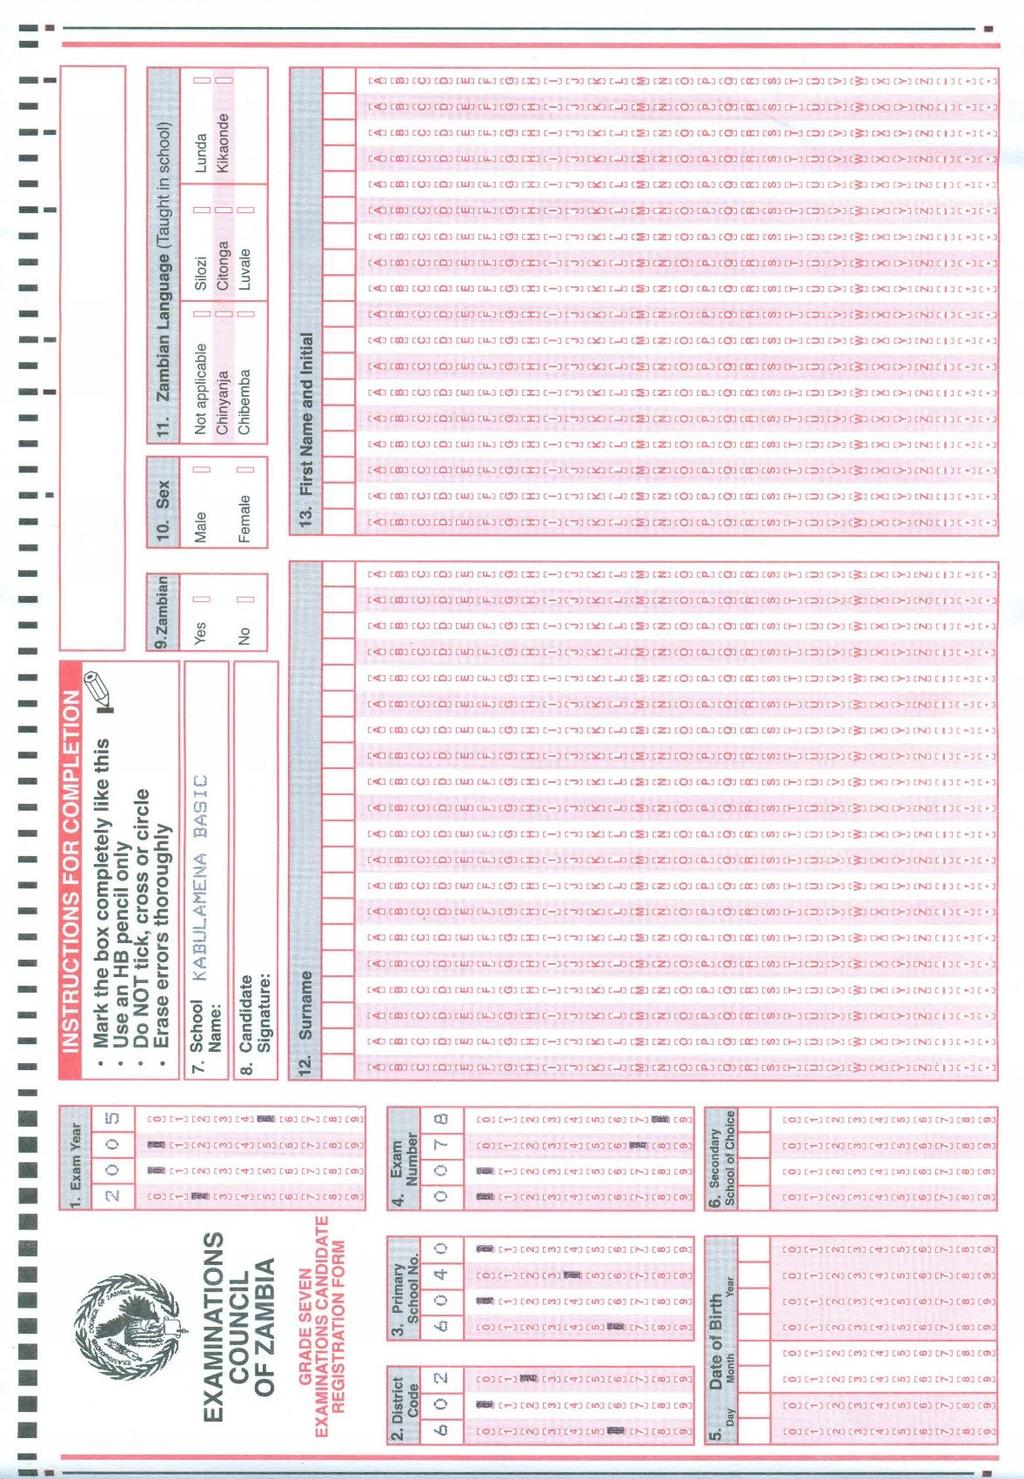 Figures 11, 12, and 13 show the OMR forms that were used at different Grades (levels) of the examinations